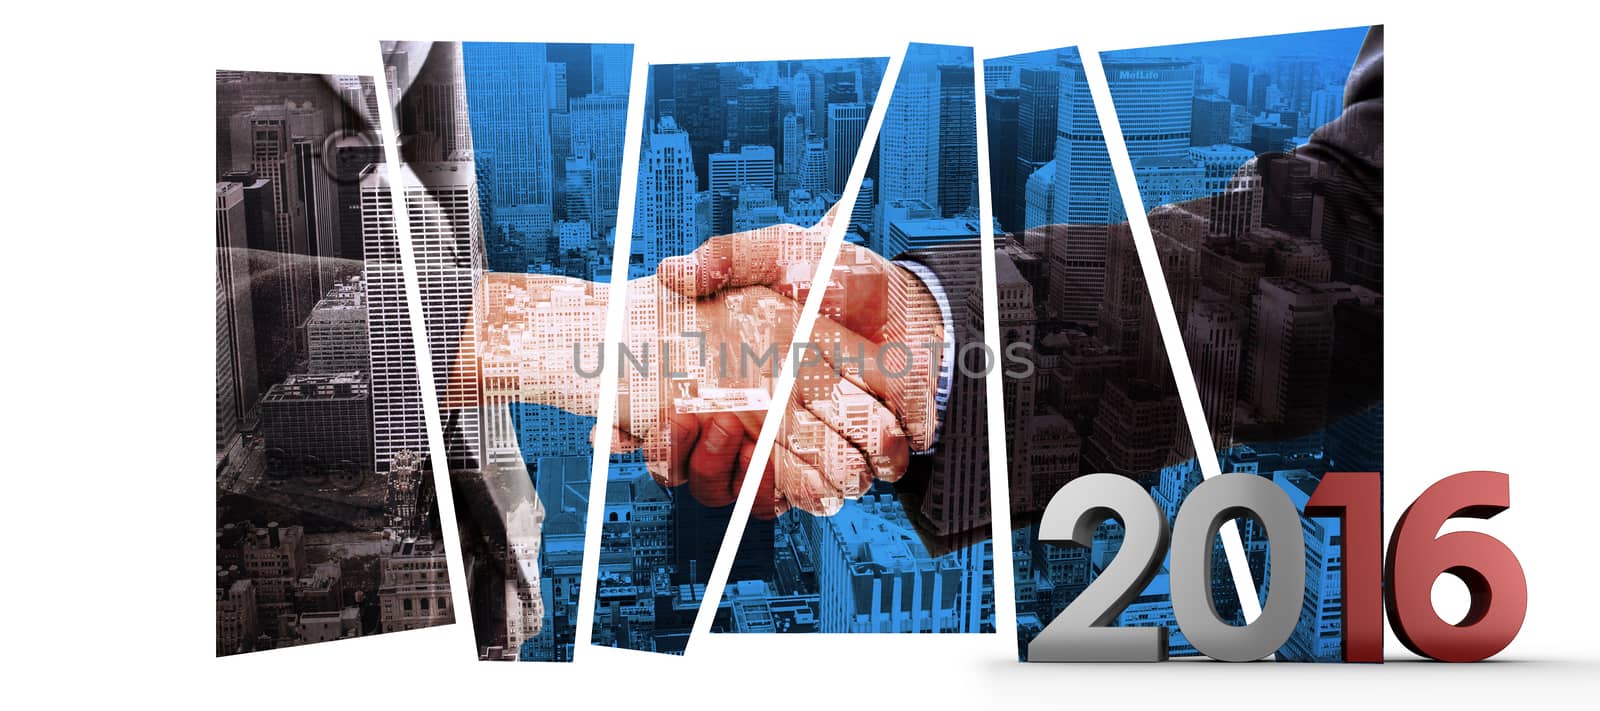 2016 graphic against composite image of close up of two businesspeople shaking their hands